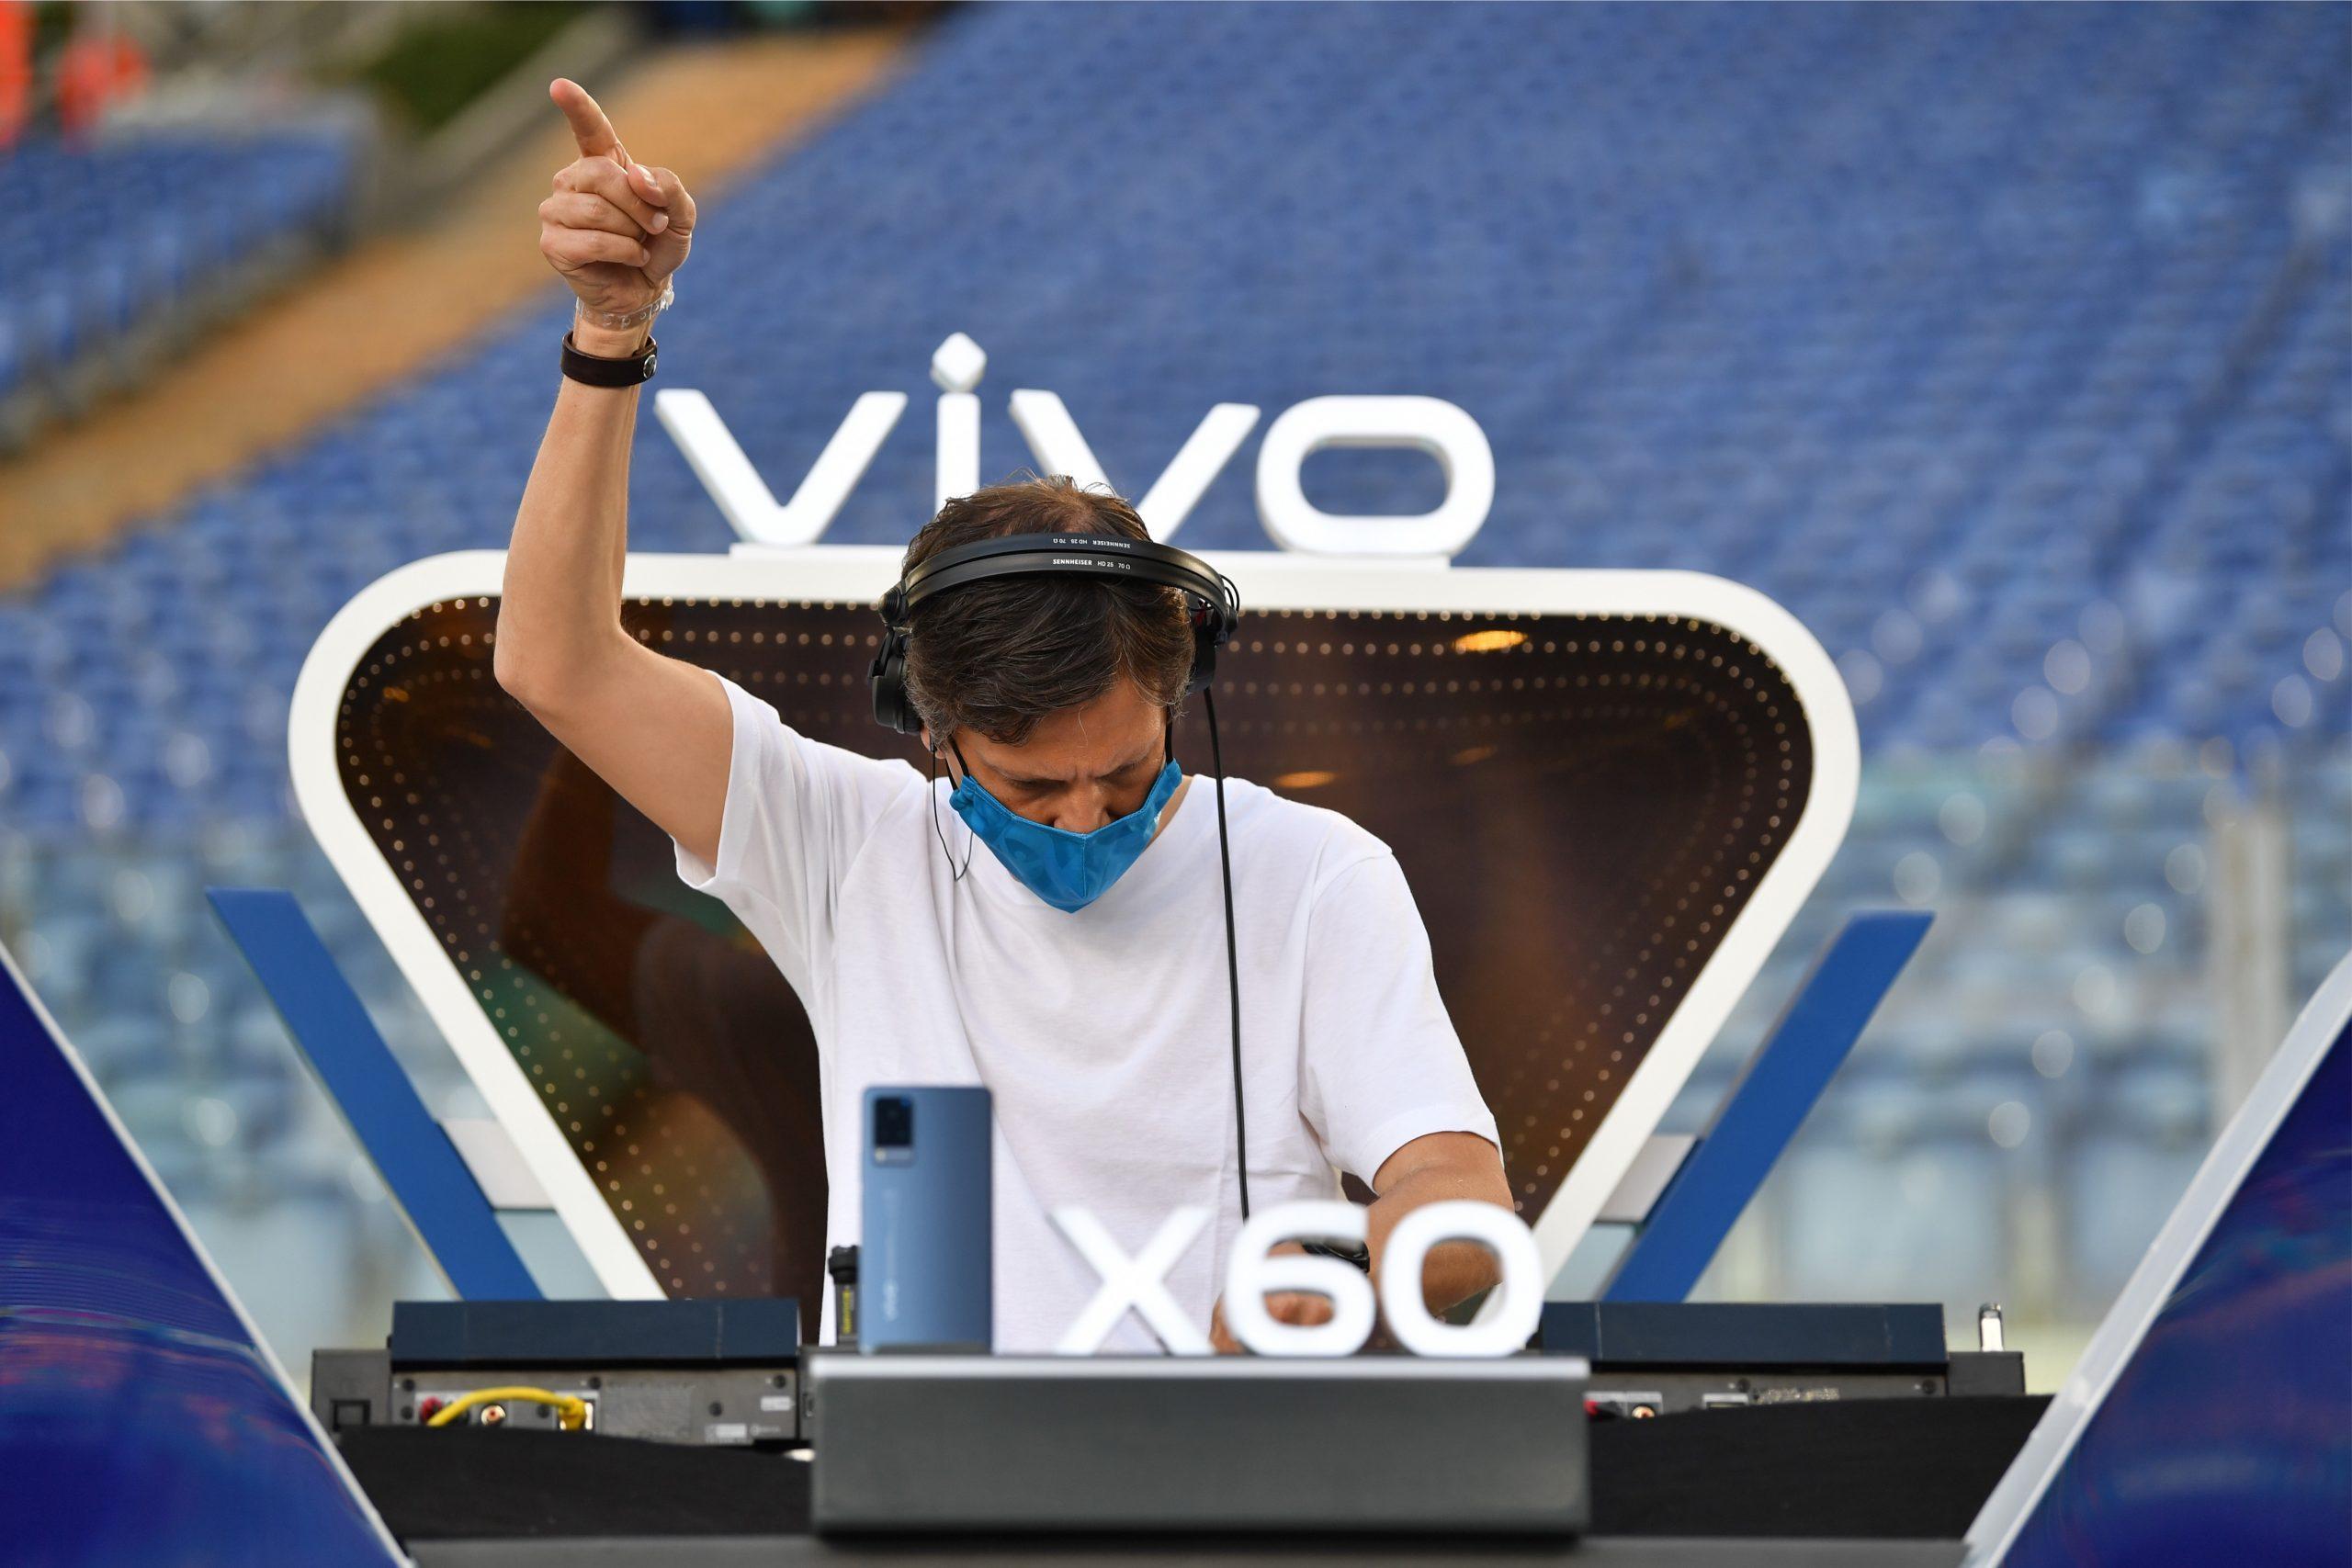 The beautiful moments of UEFA EURO 2020™ made magical by vivo